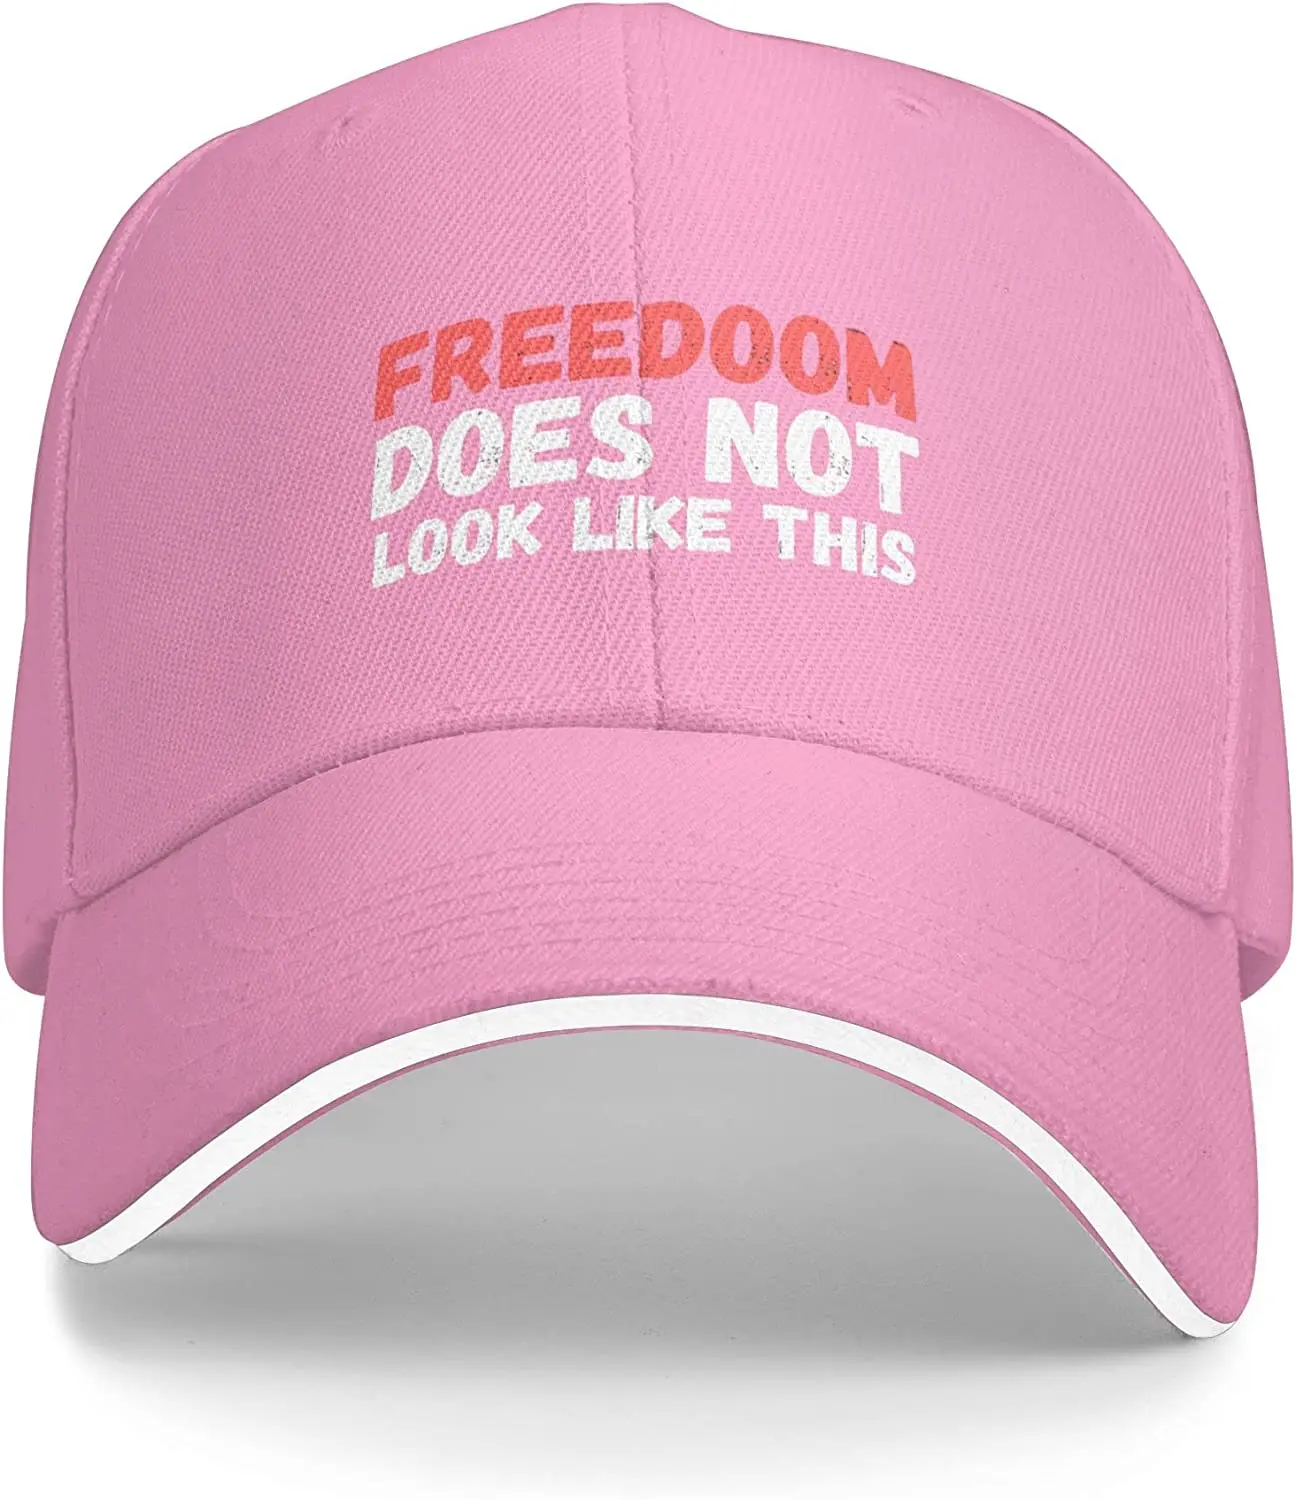 

Freedom Does Not Look Like This Hat, Trucker Hat for Men Women Outdoors Snapback Hat